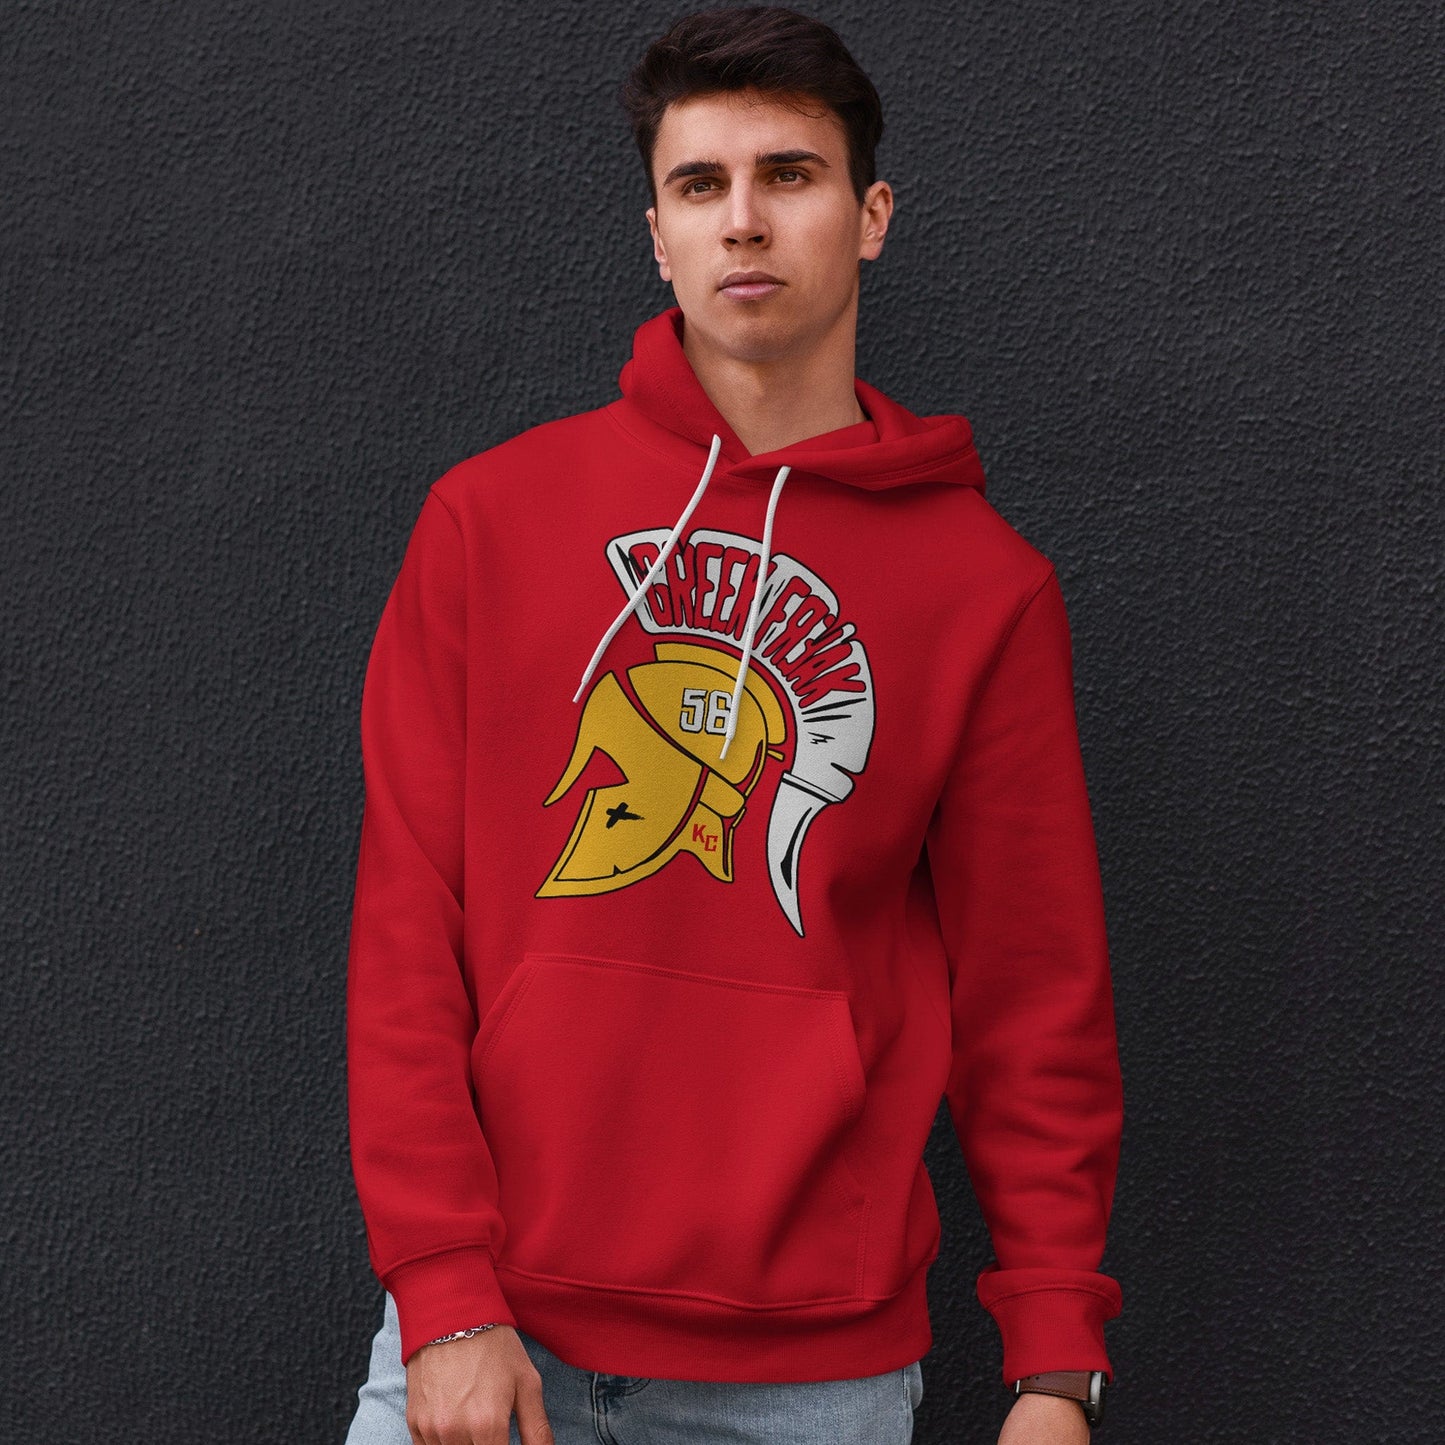 KC Swag | Kansas City Chiefs white/gold GREAT FREAK 56 on red sponge-fleece pullover hoodie worn by male model standing in front of dark gray wall